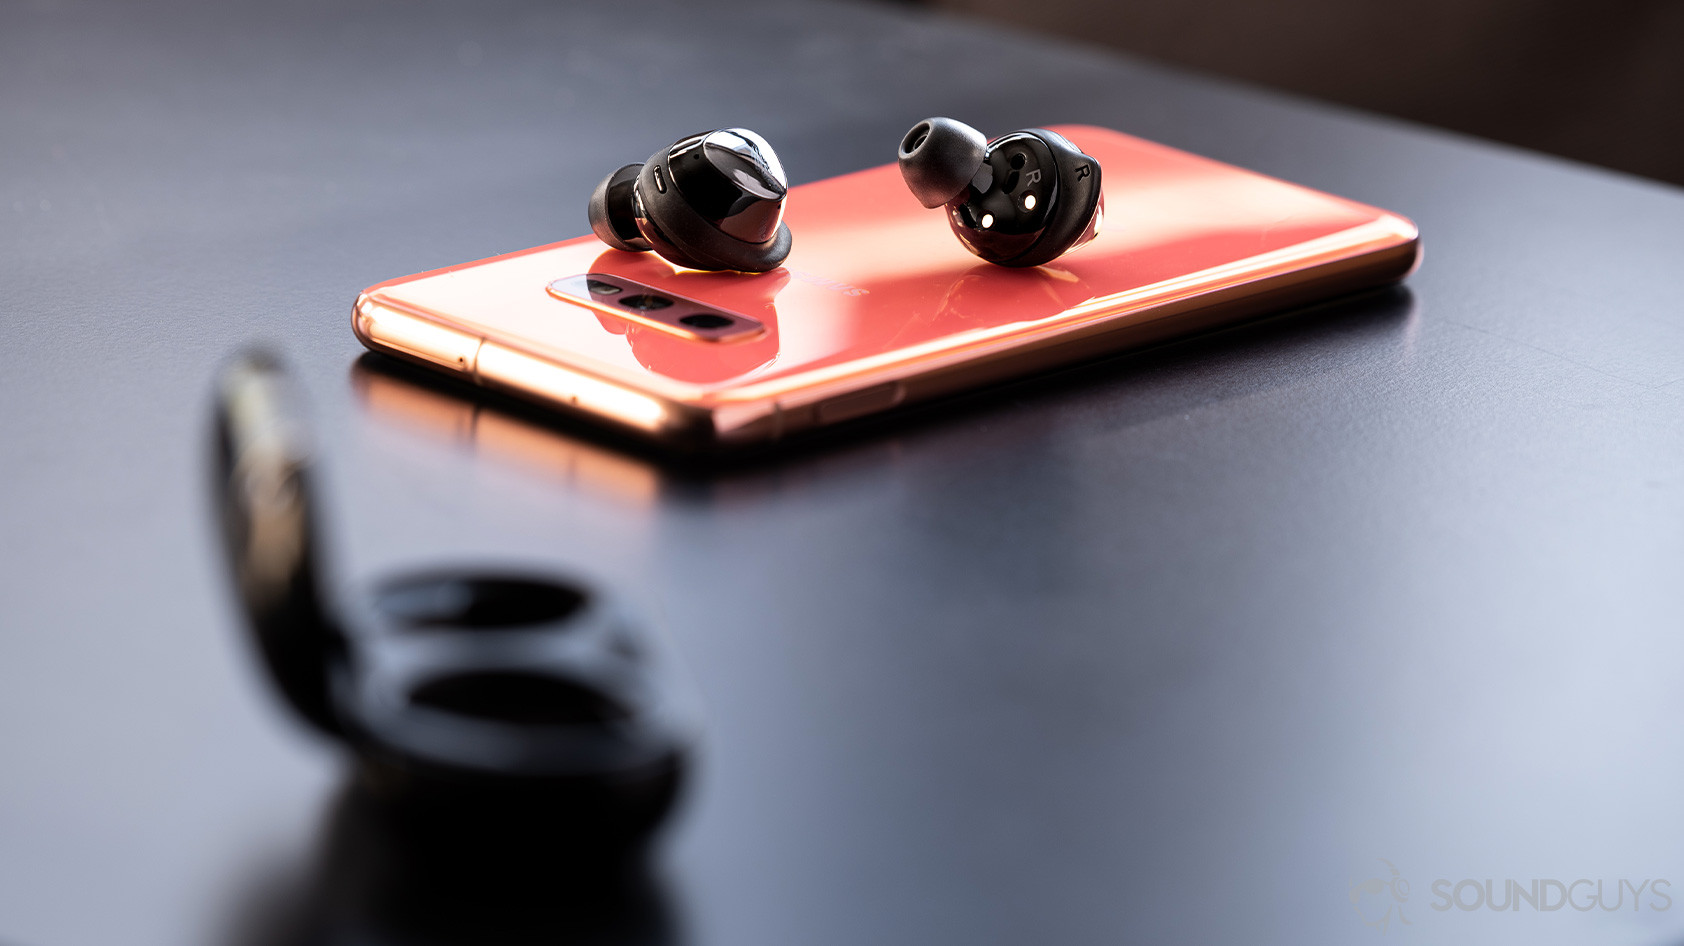 A picture of the Samsung Galaxy Buds Plus earbuds on top of the Galaxy S10e smartphone in flamingo pink.